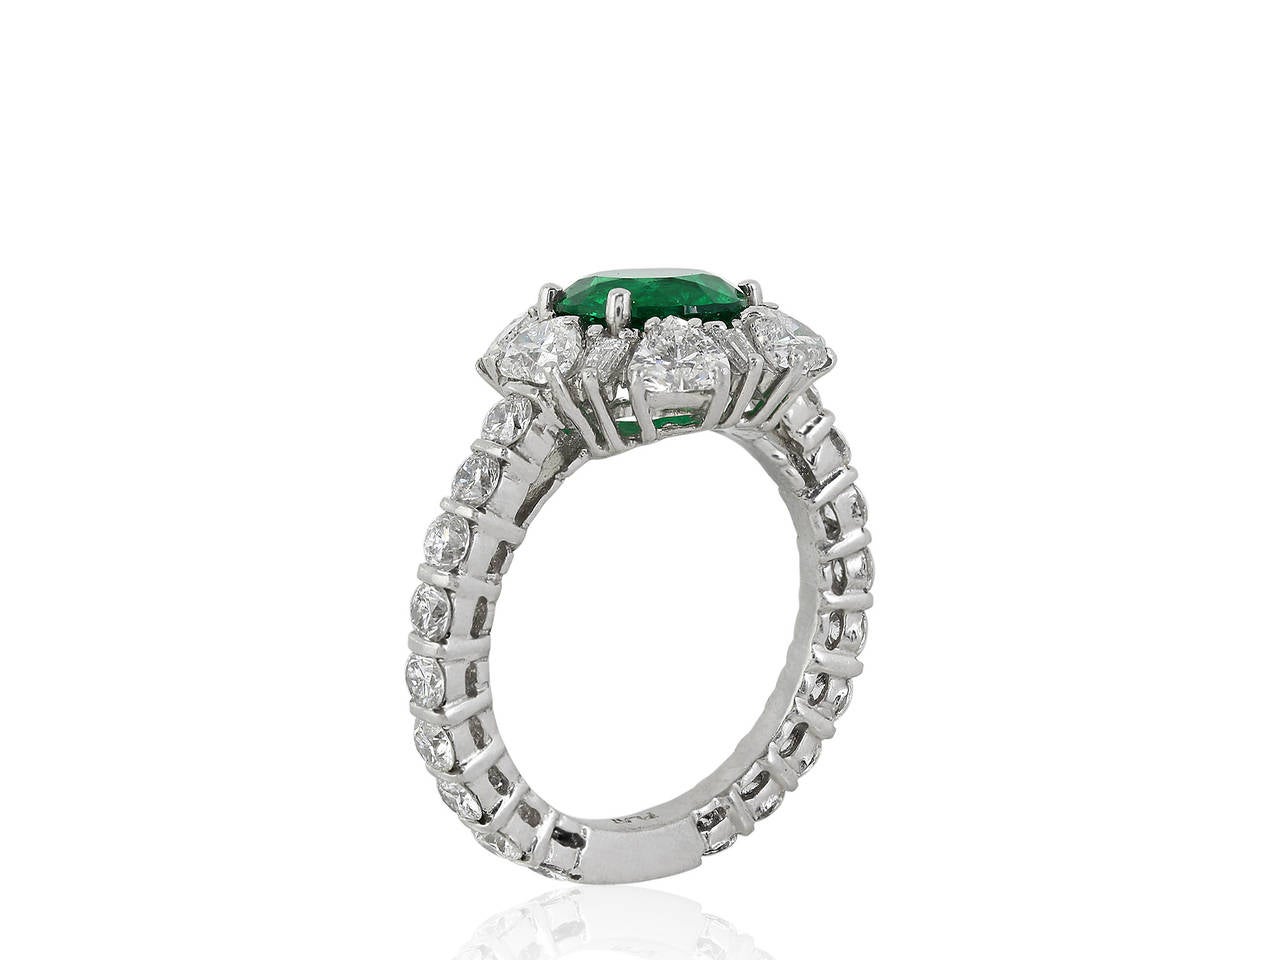 Platinum cluster ring consisting of 1 round brilliant cut Colombian emerald weighing 2.02 carats set with 2.86 carats total weight of round brilliant cut, heart shape and baguette diamonds.